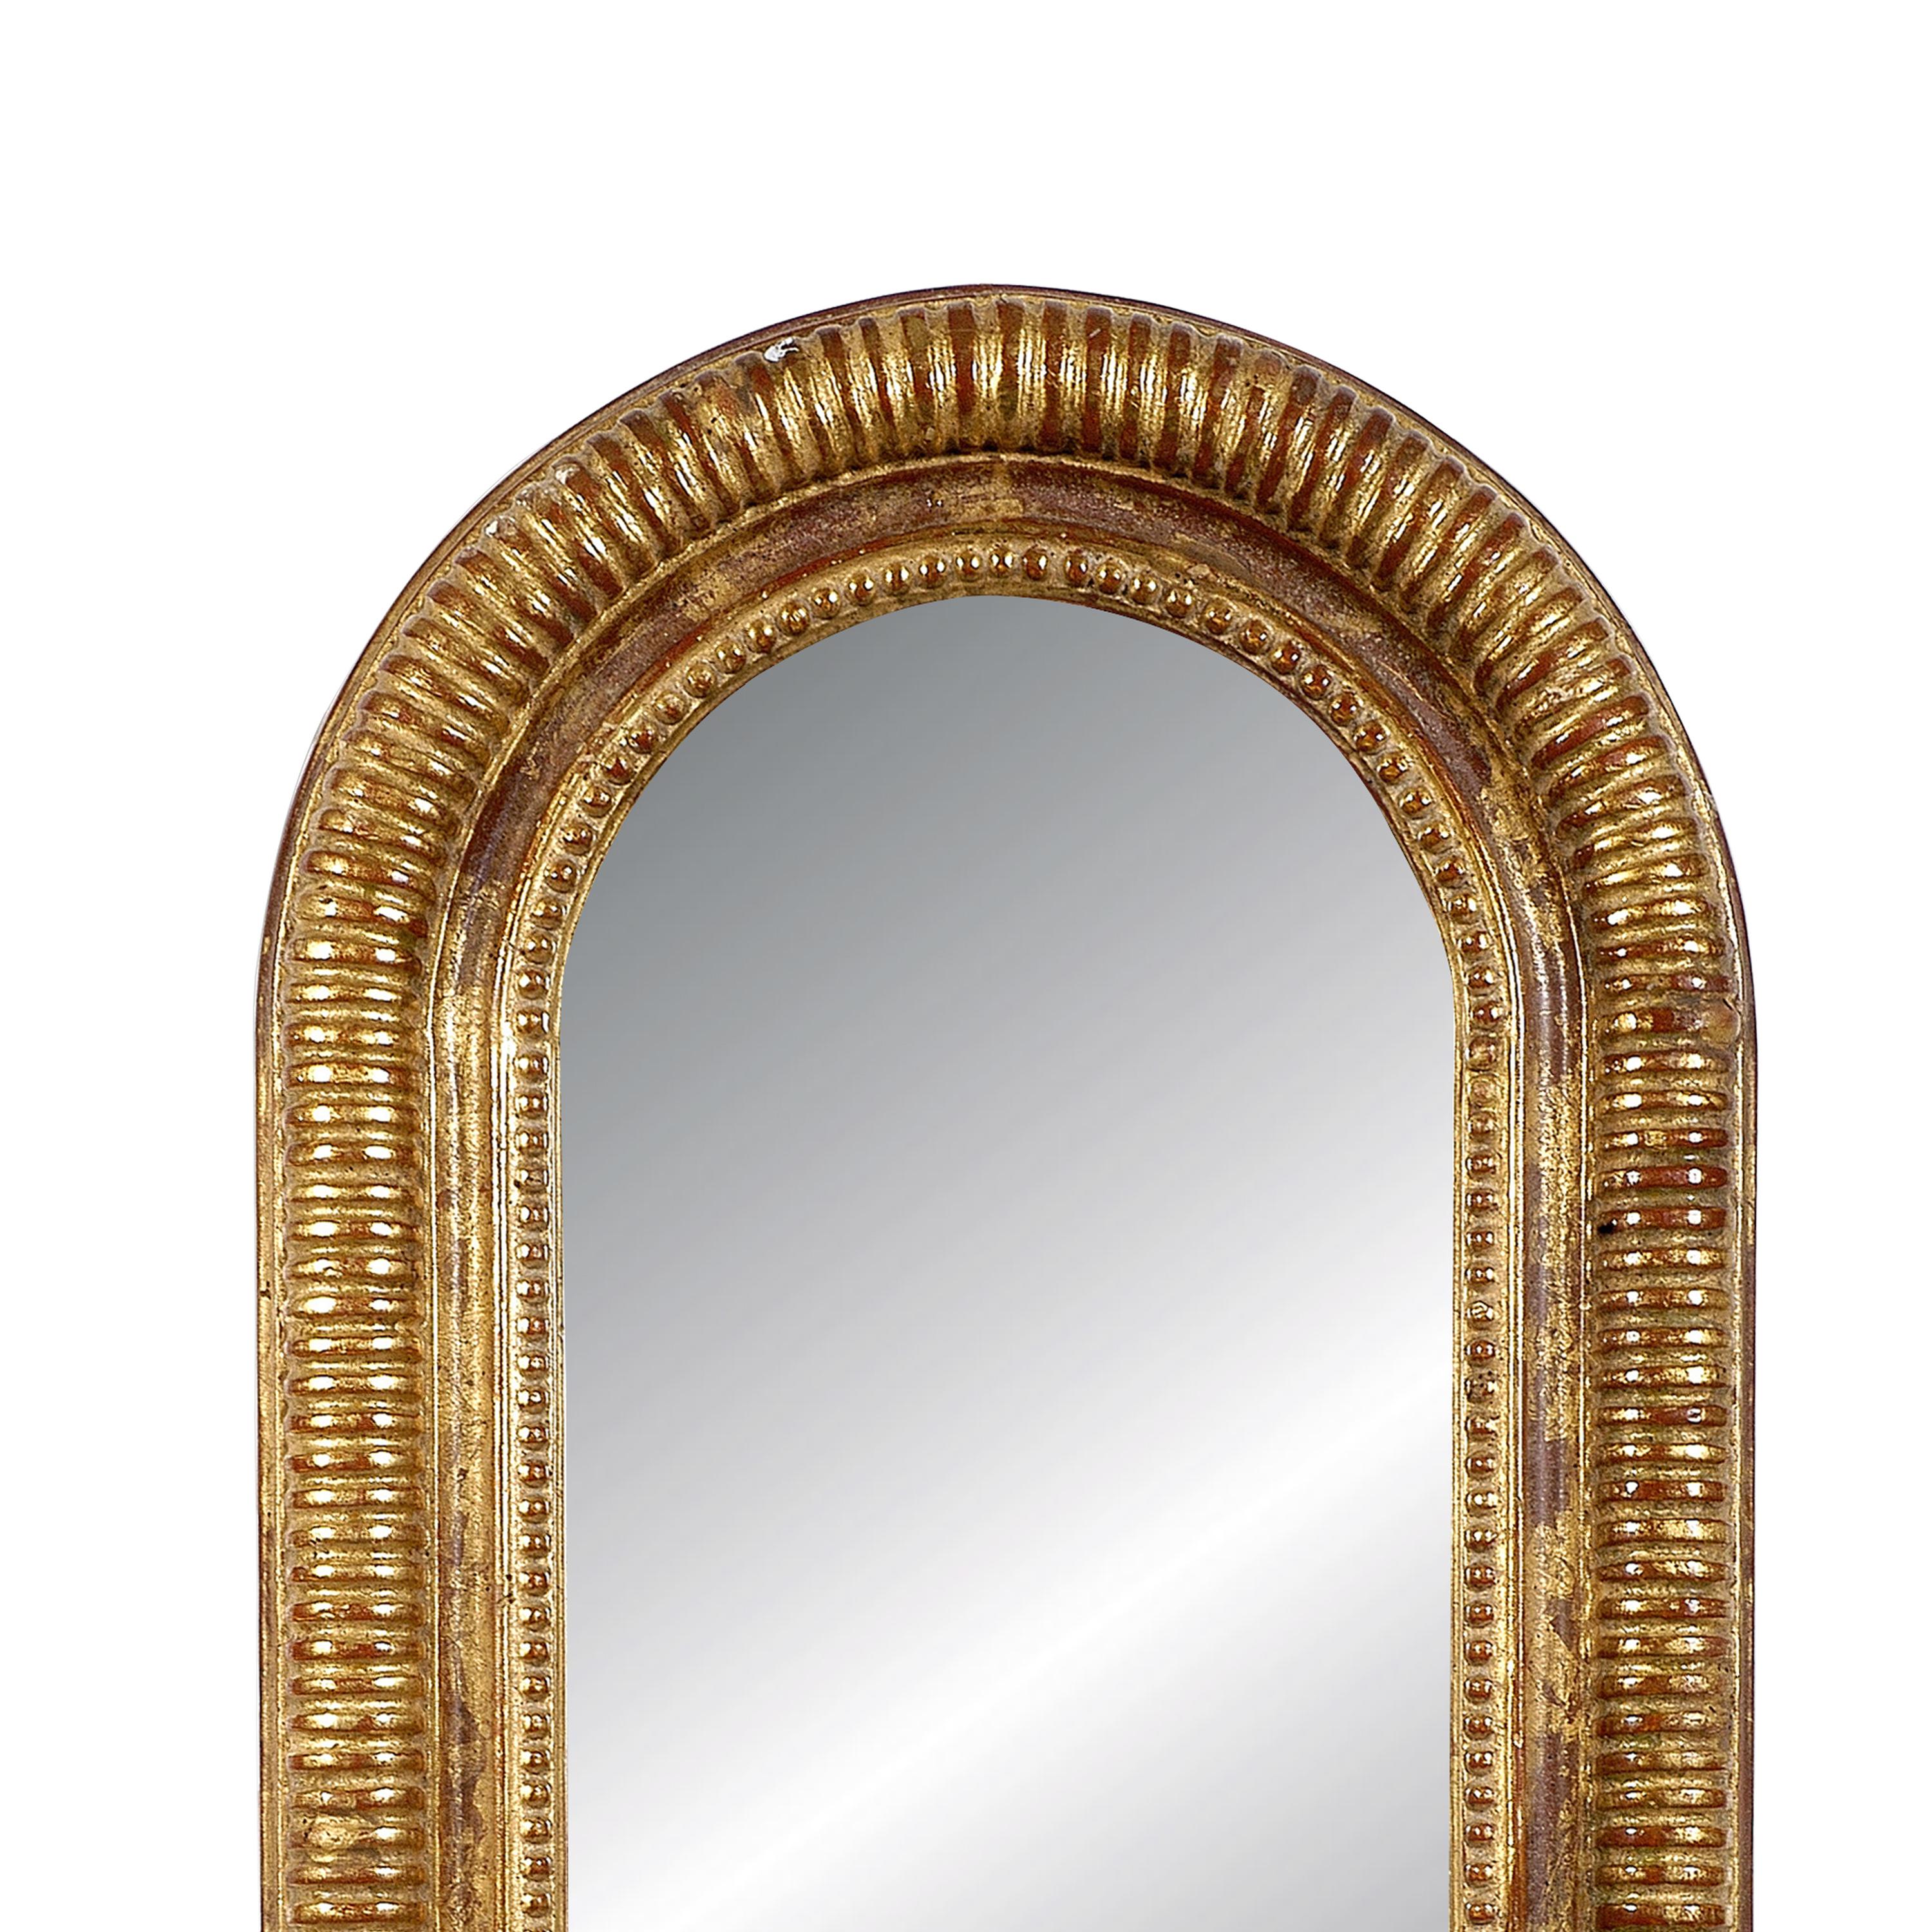 Neoclassical rectangular handcrafted mirror. Rectangular hand carved wooden structure with gold foil finished. Spain, 1970.